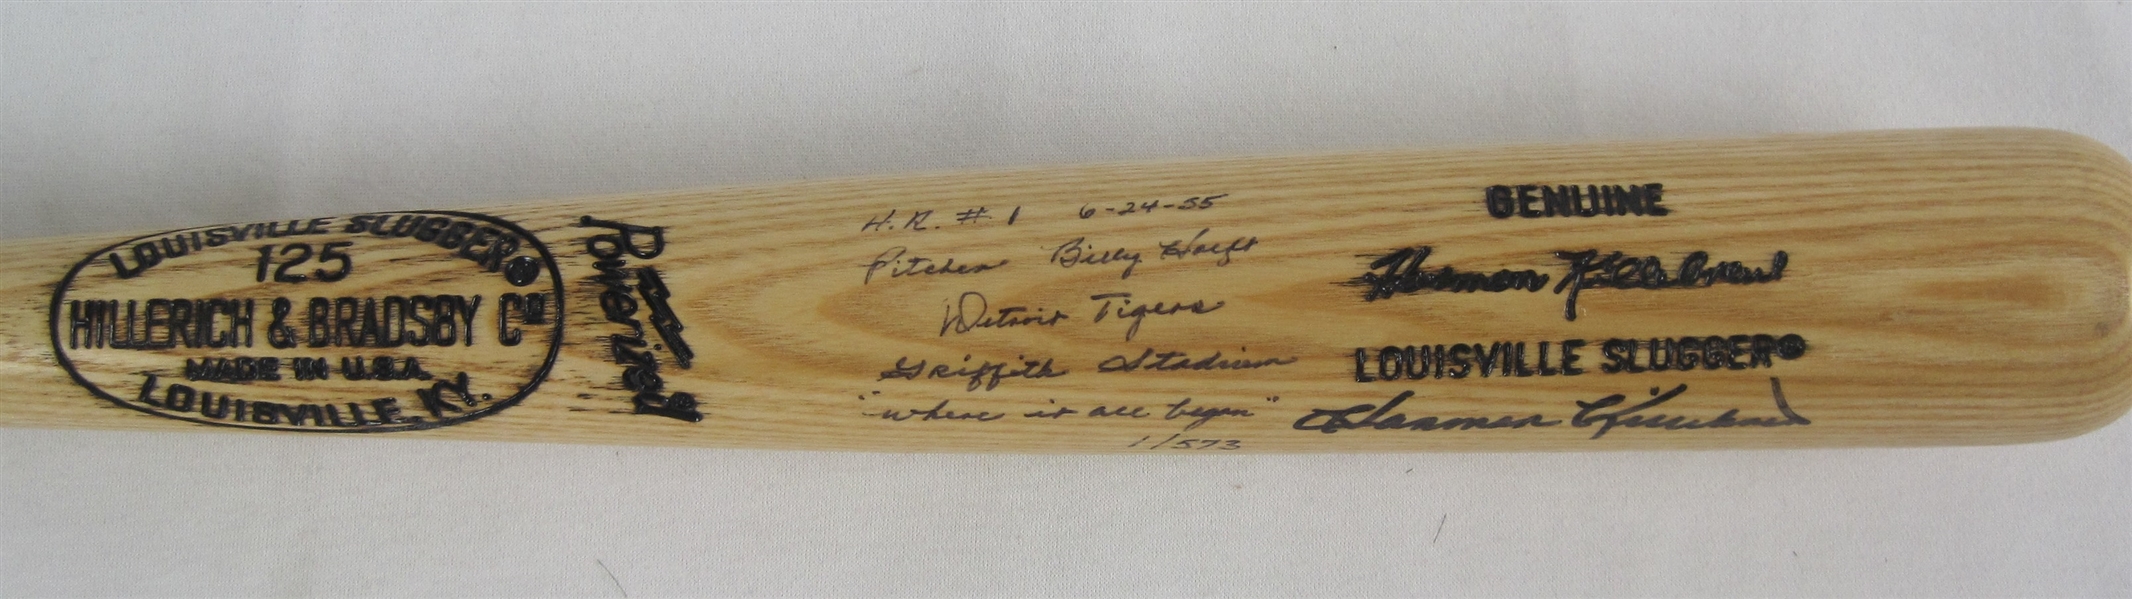 Harmon Killebrew One-Of-A-Kind Autographed & Inscribed Bat 